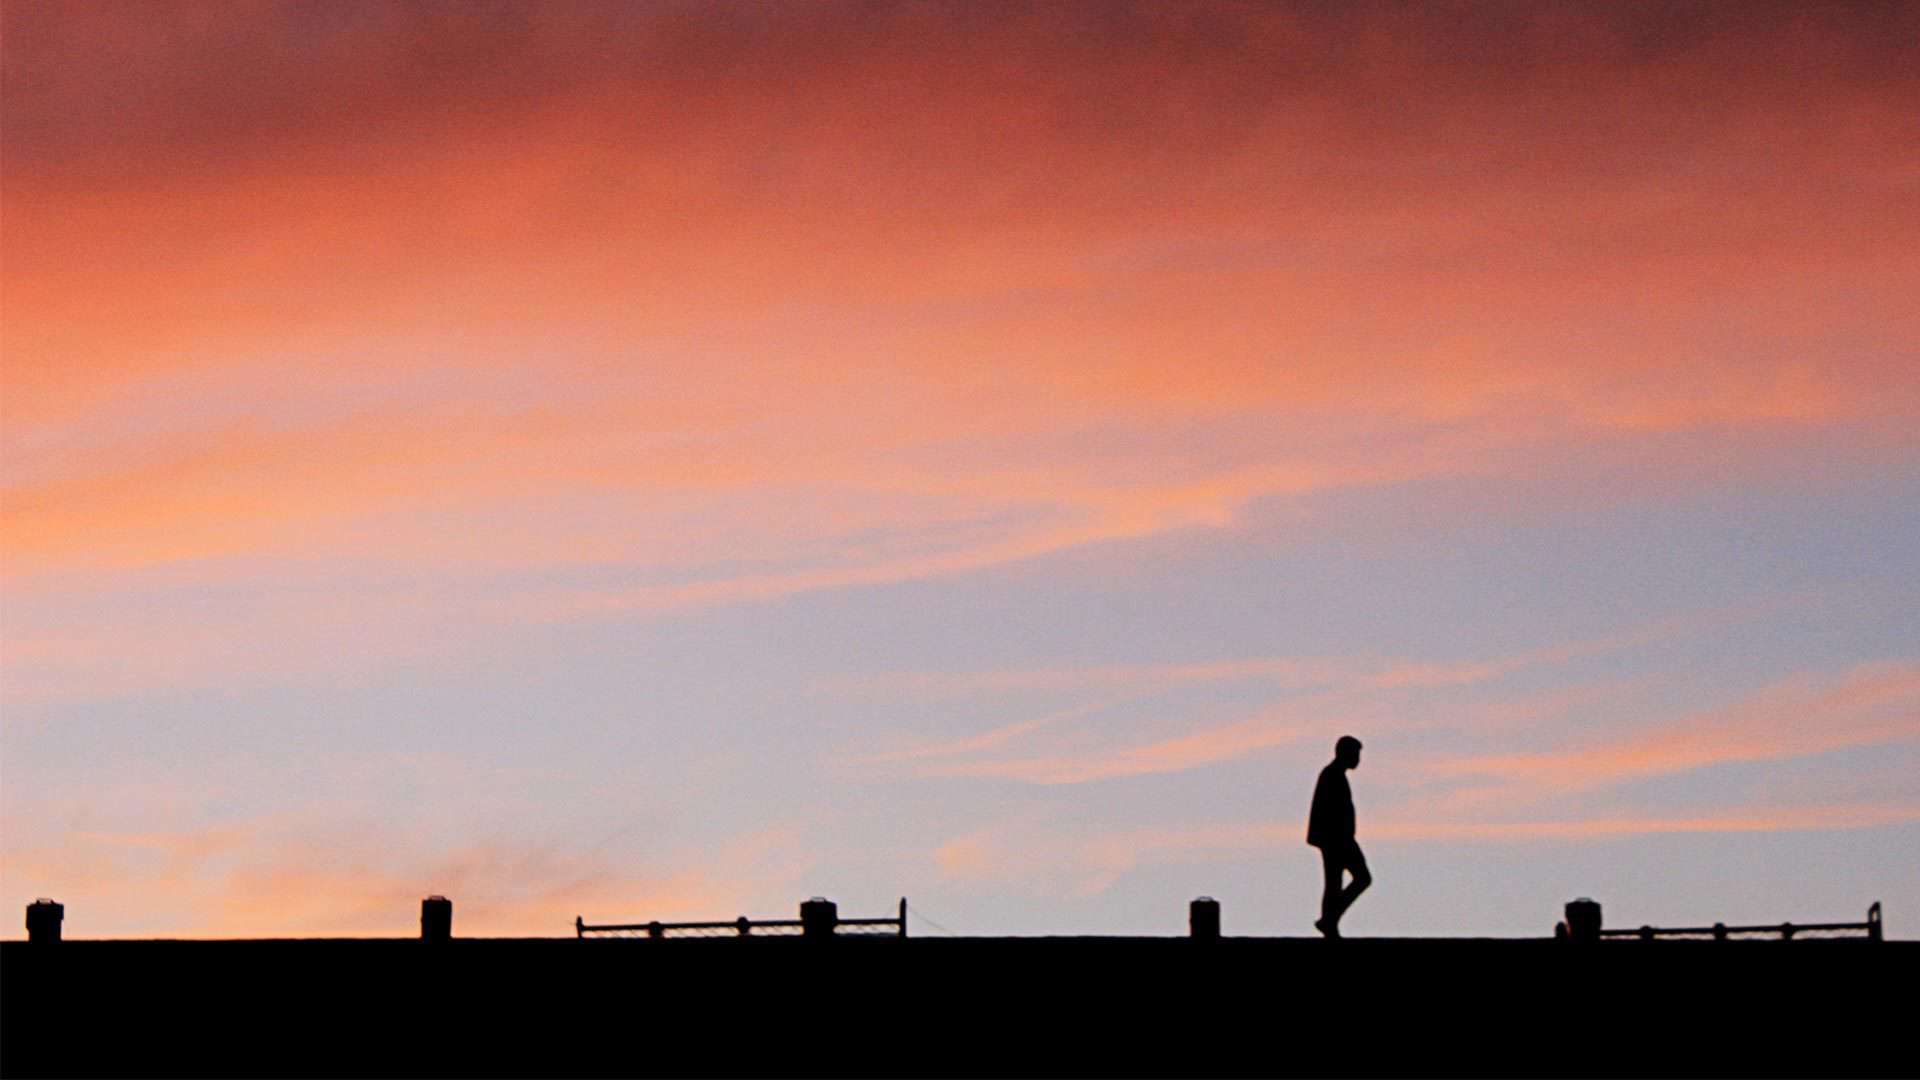 silhouette of man walking on roof with sunset behind him